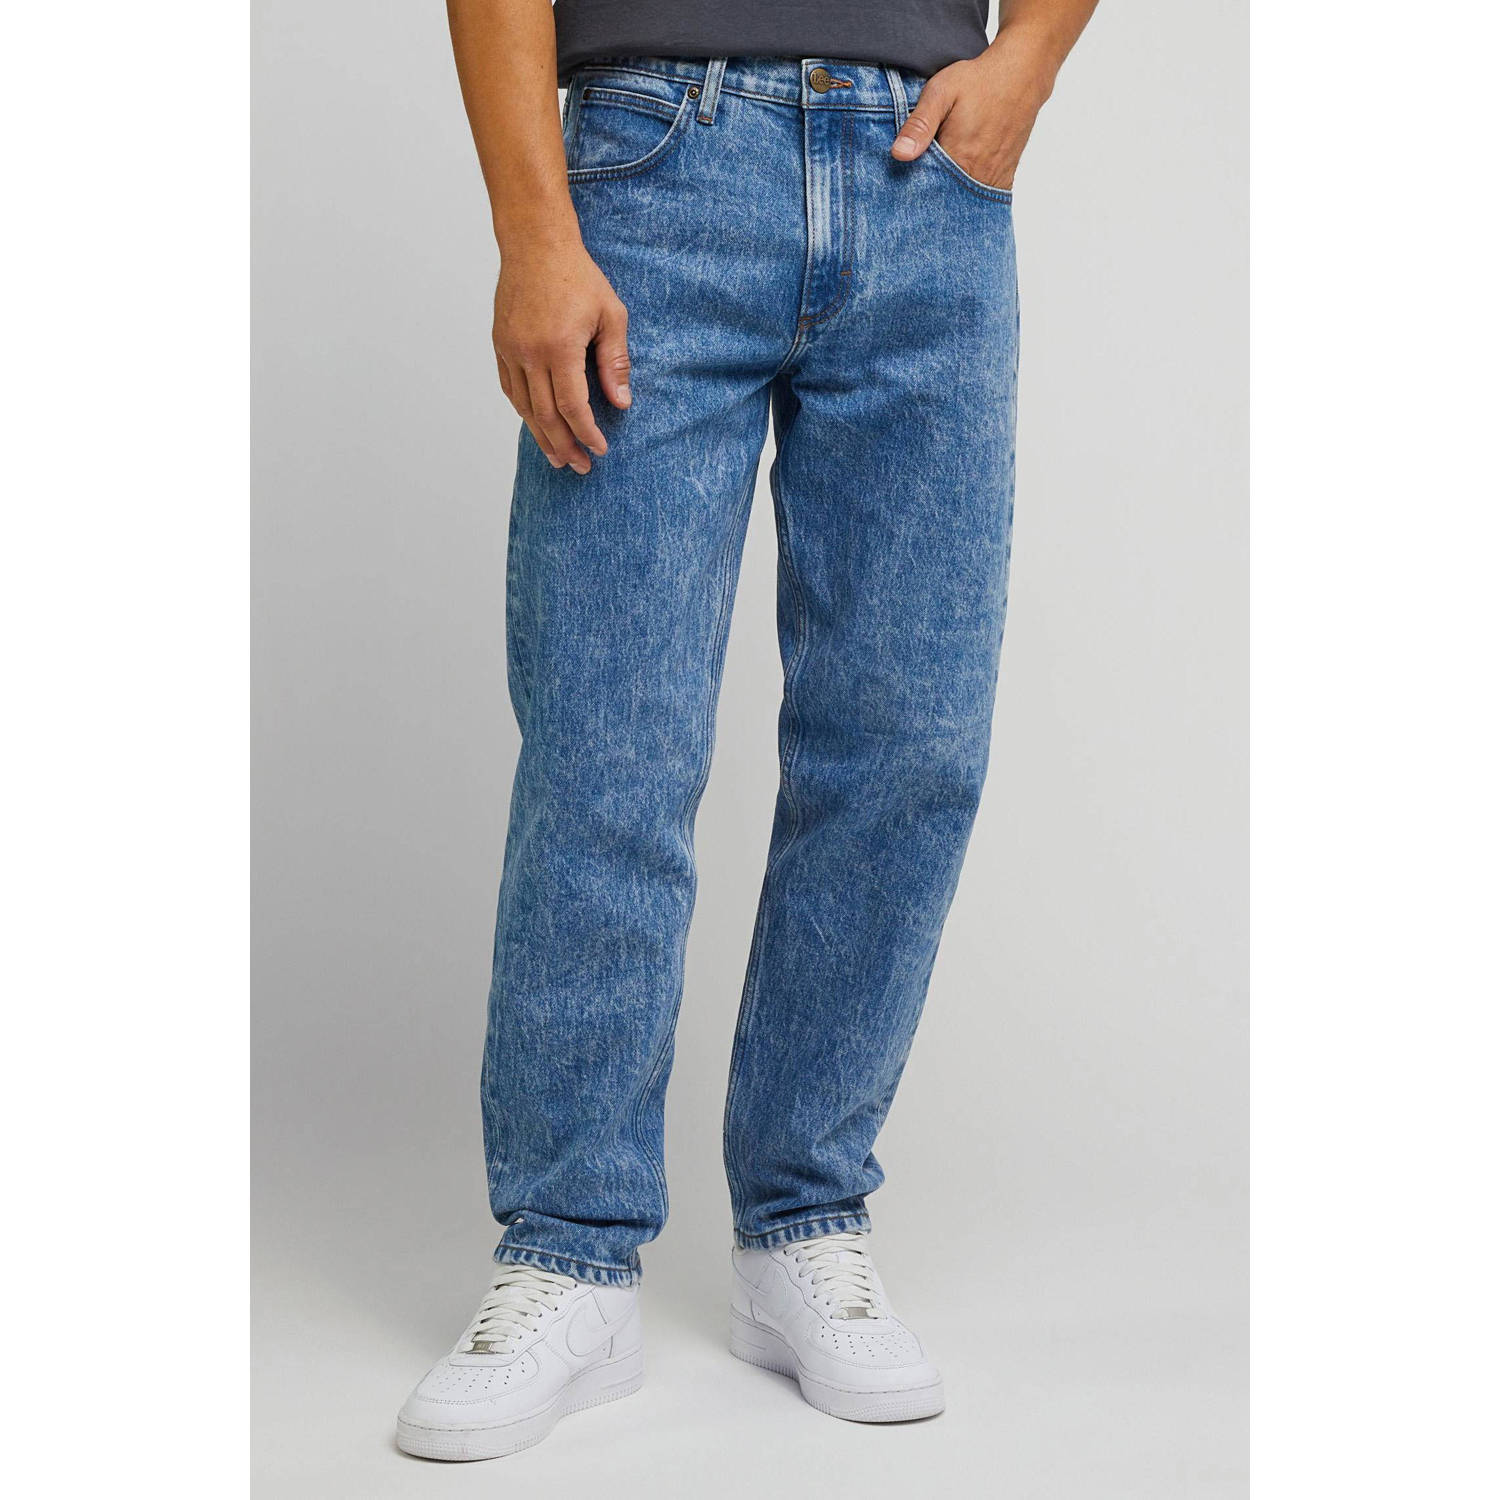 Lee tapered fit jeans OSCAR downtown